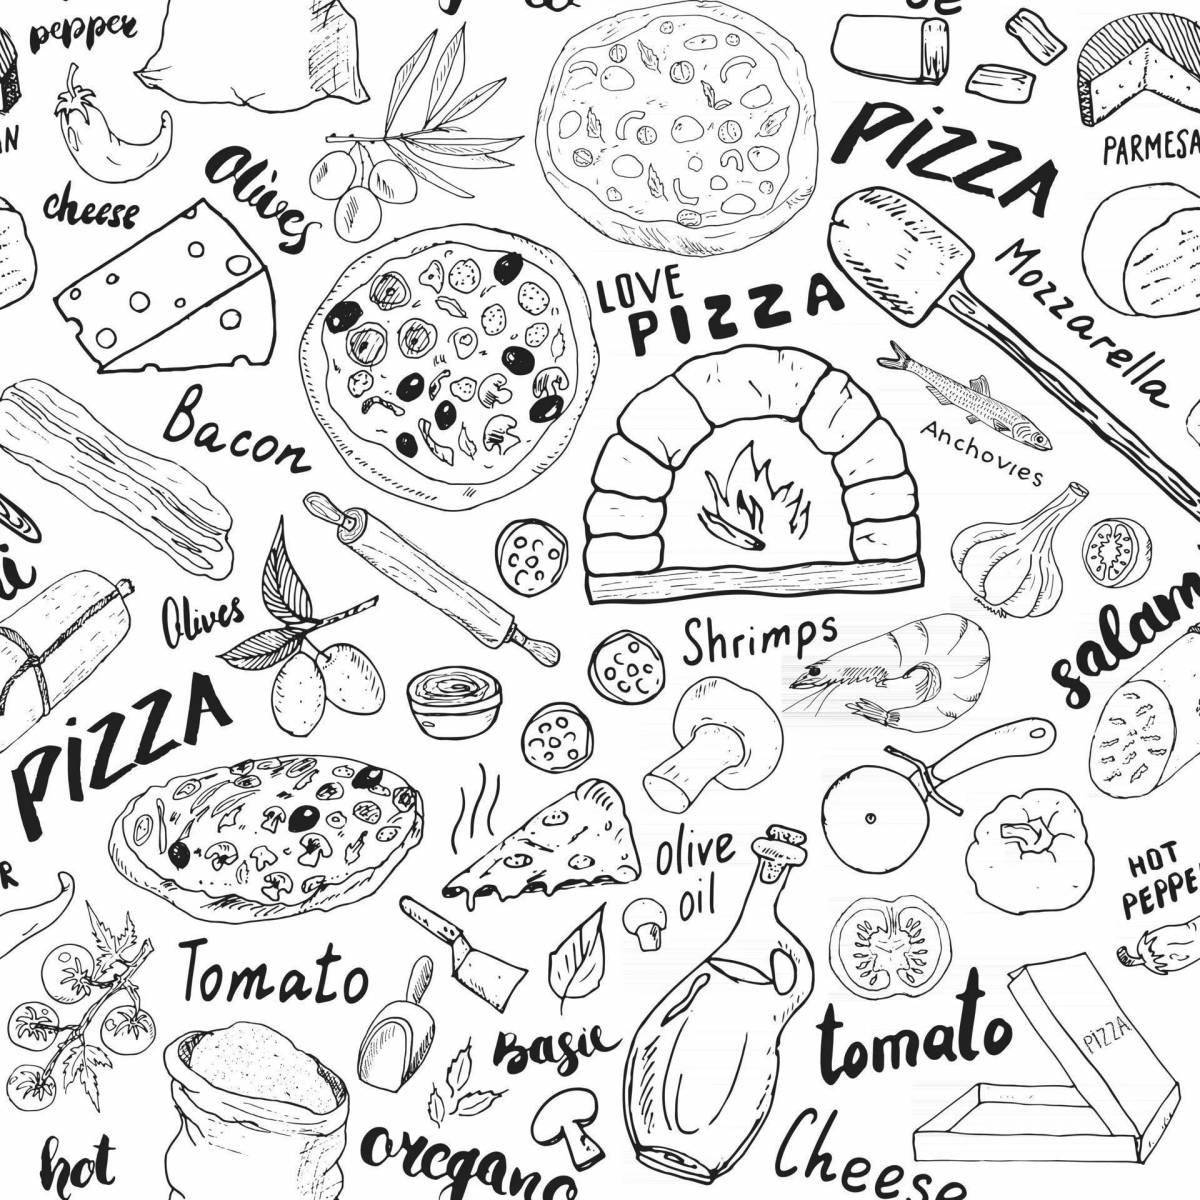 Coloring page stimulating pizza ingredients